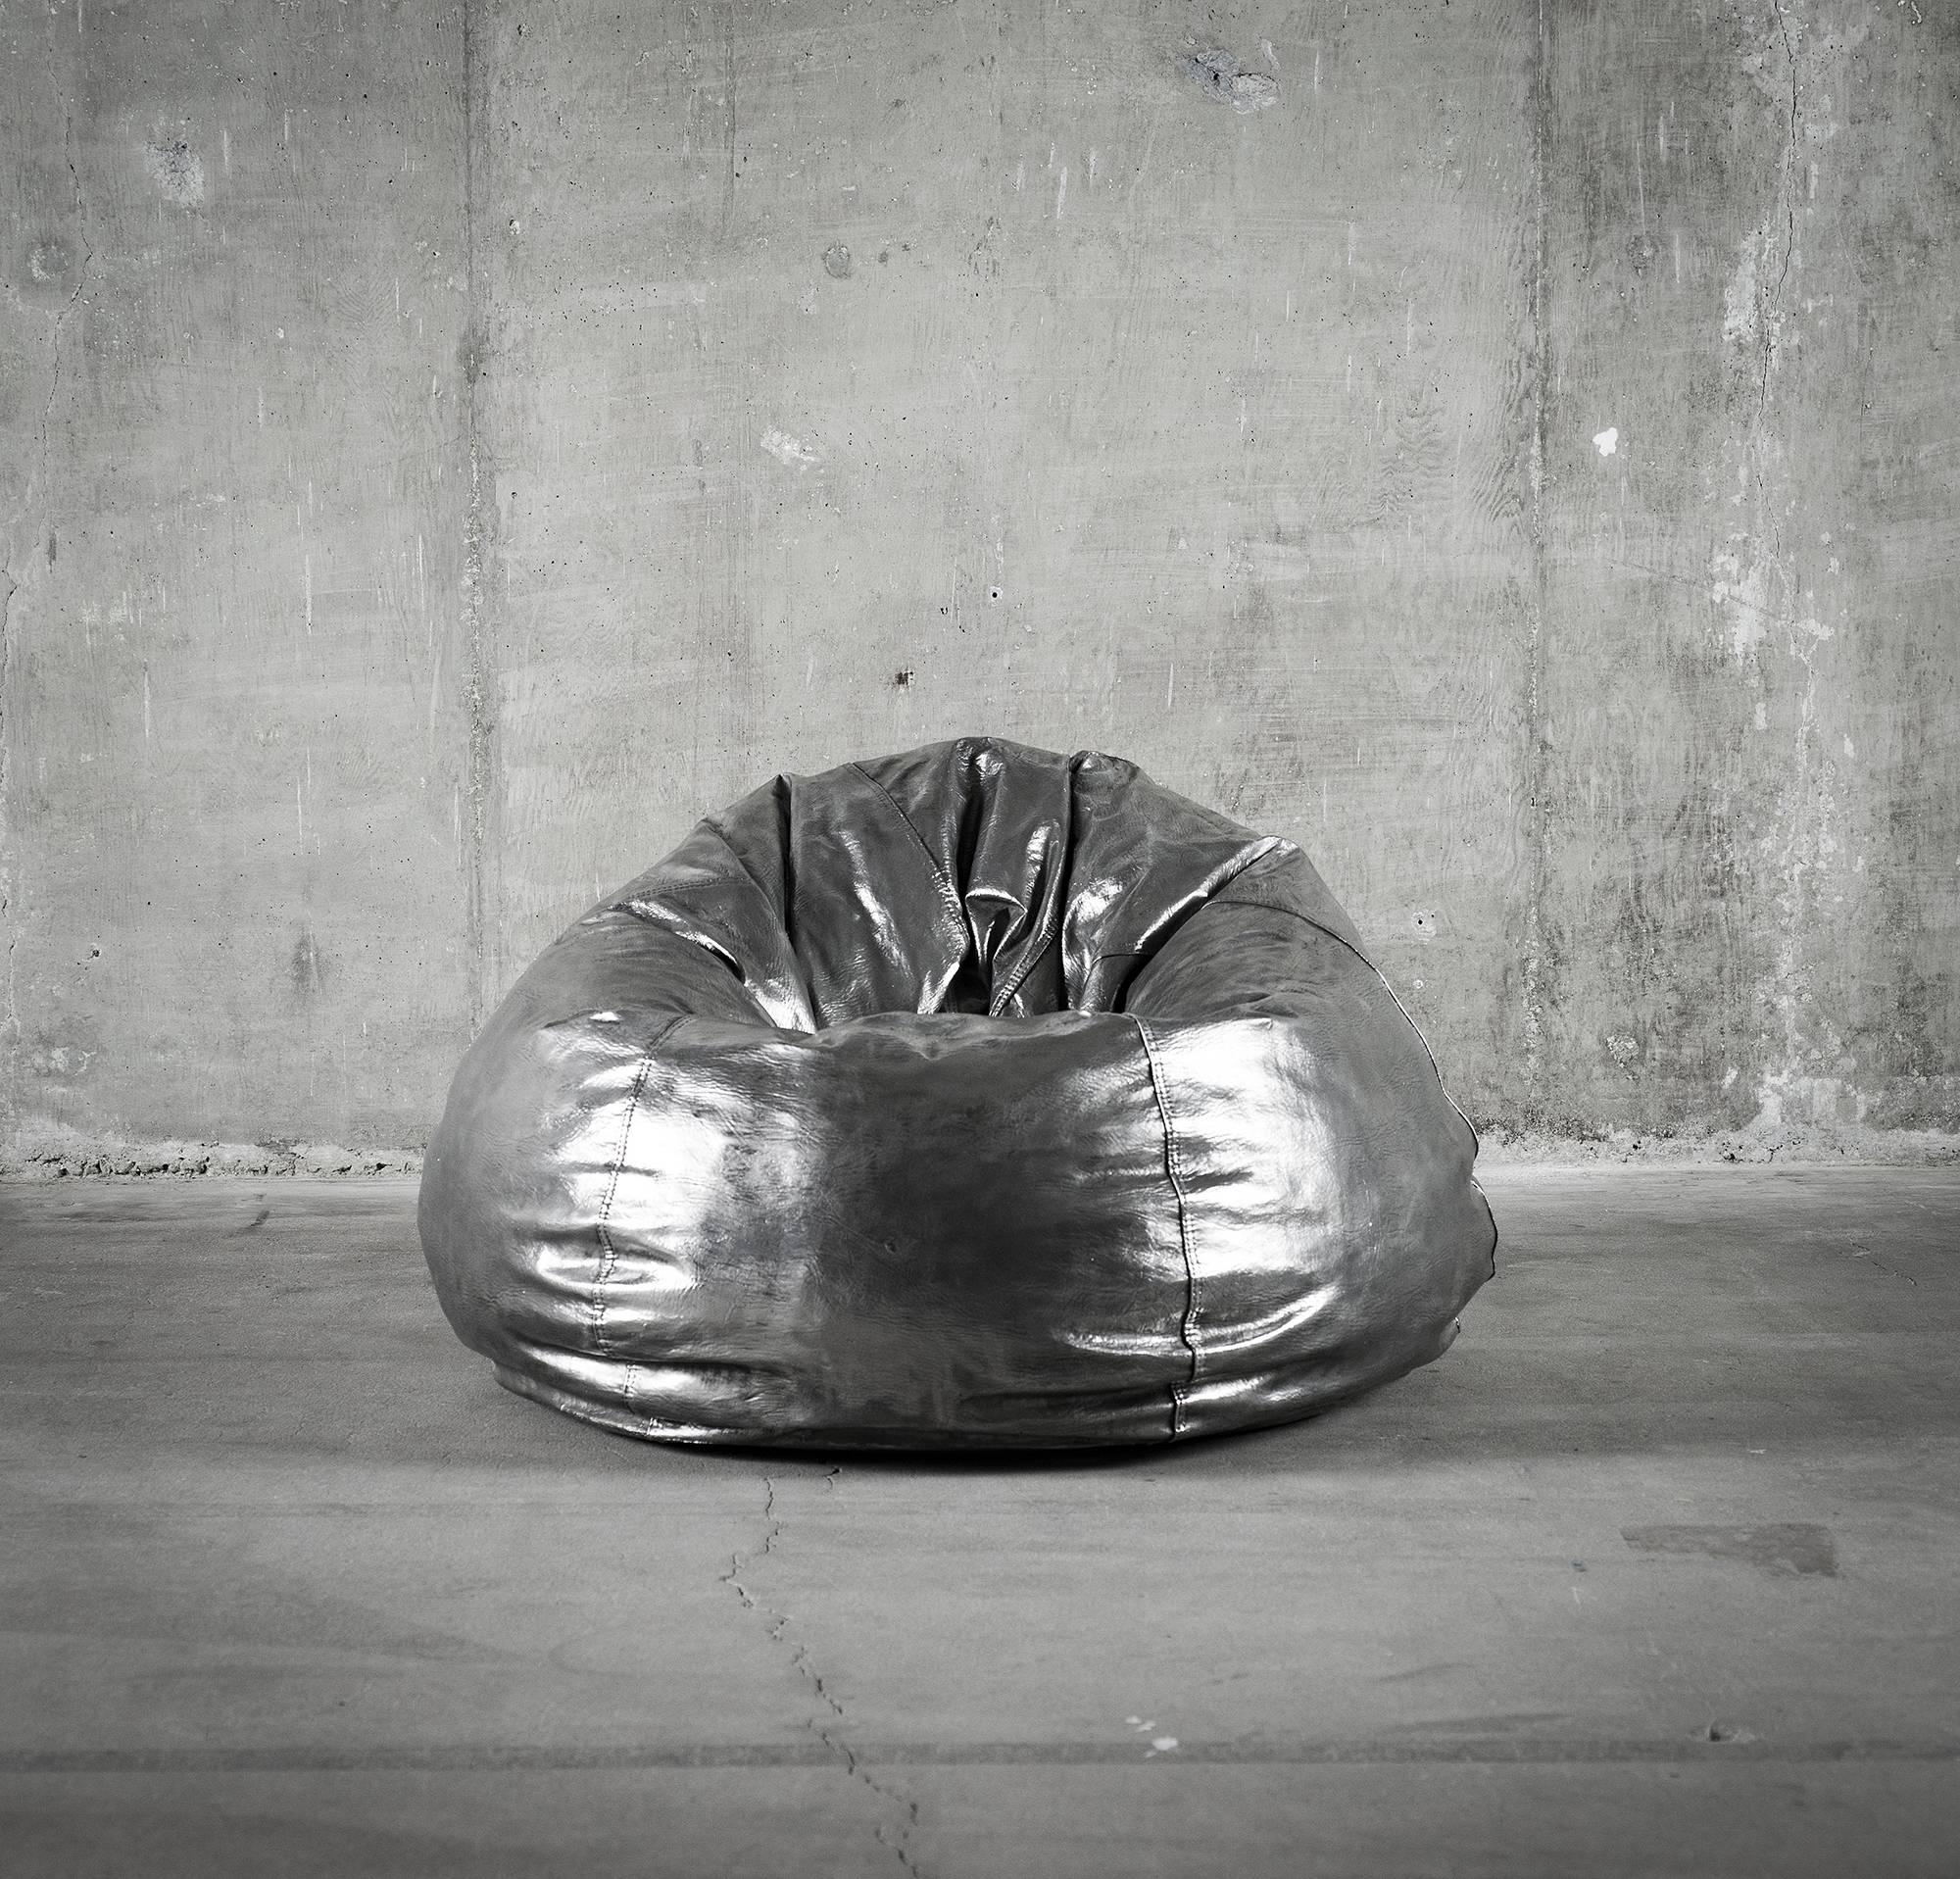 Beanbag sculpture in stainless steel by Cheryl Ekstrom, signed and numbered